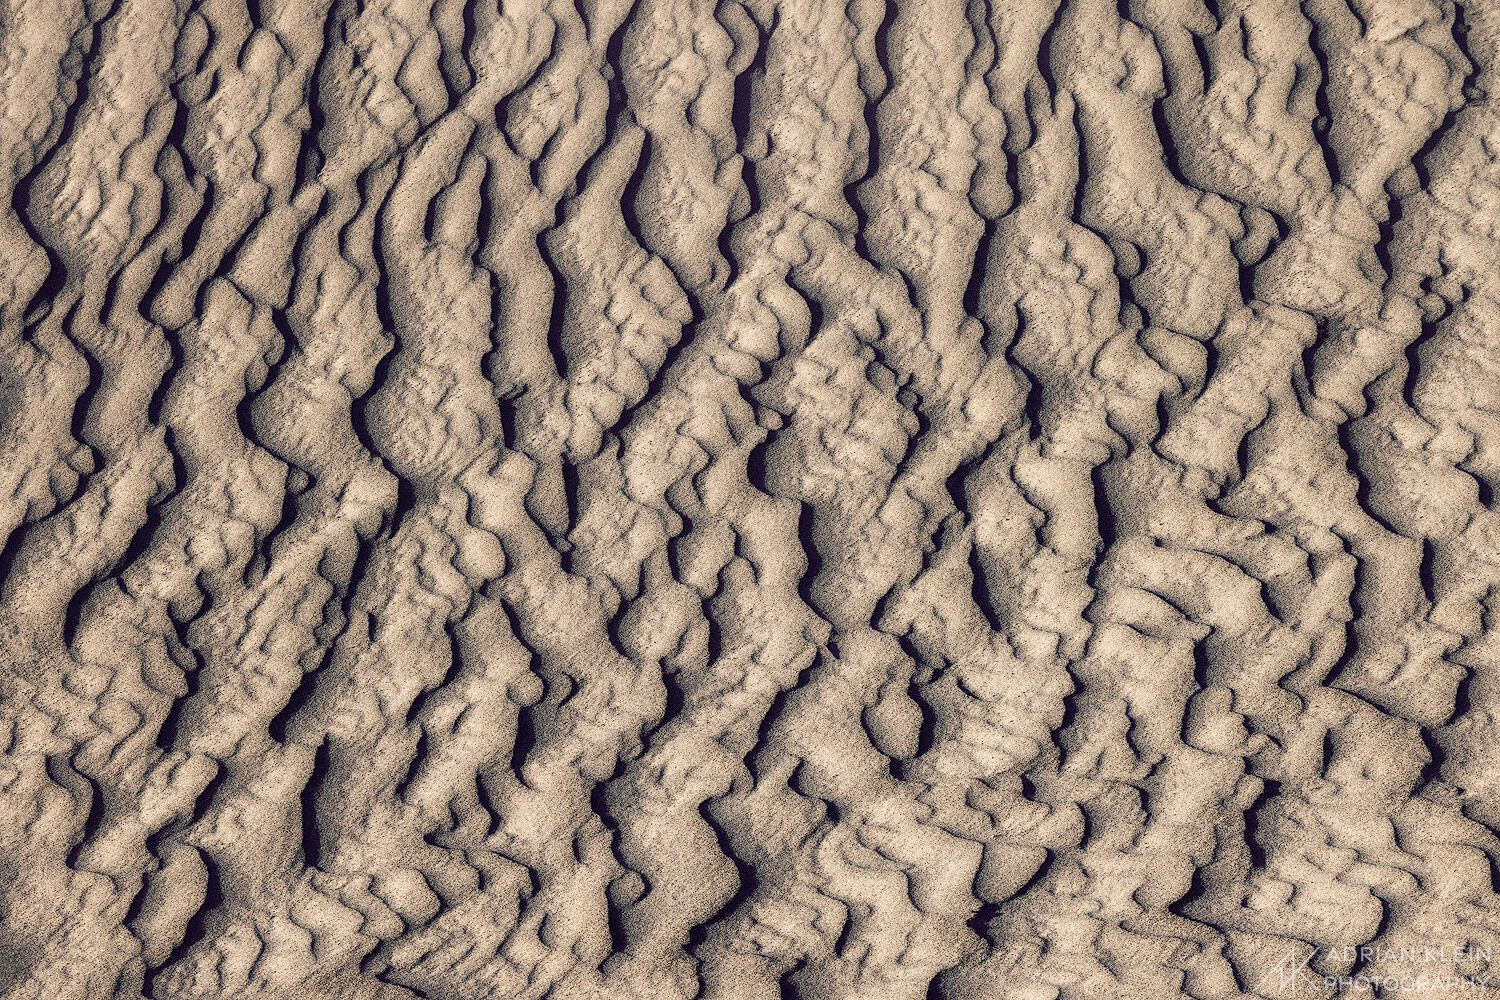 Sand dunes up close with endless wavy and scalloped texture. State of Washington. Limited Edition of 50.